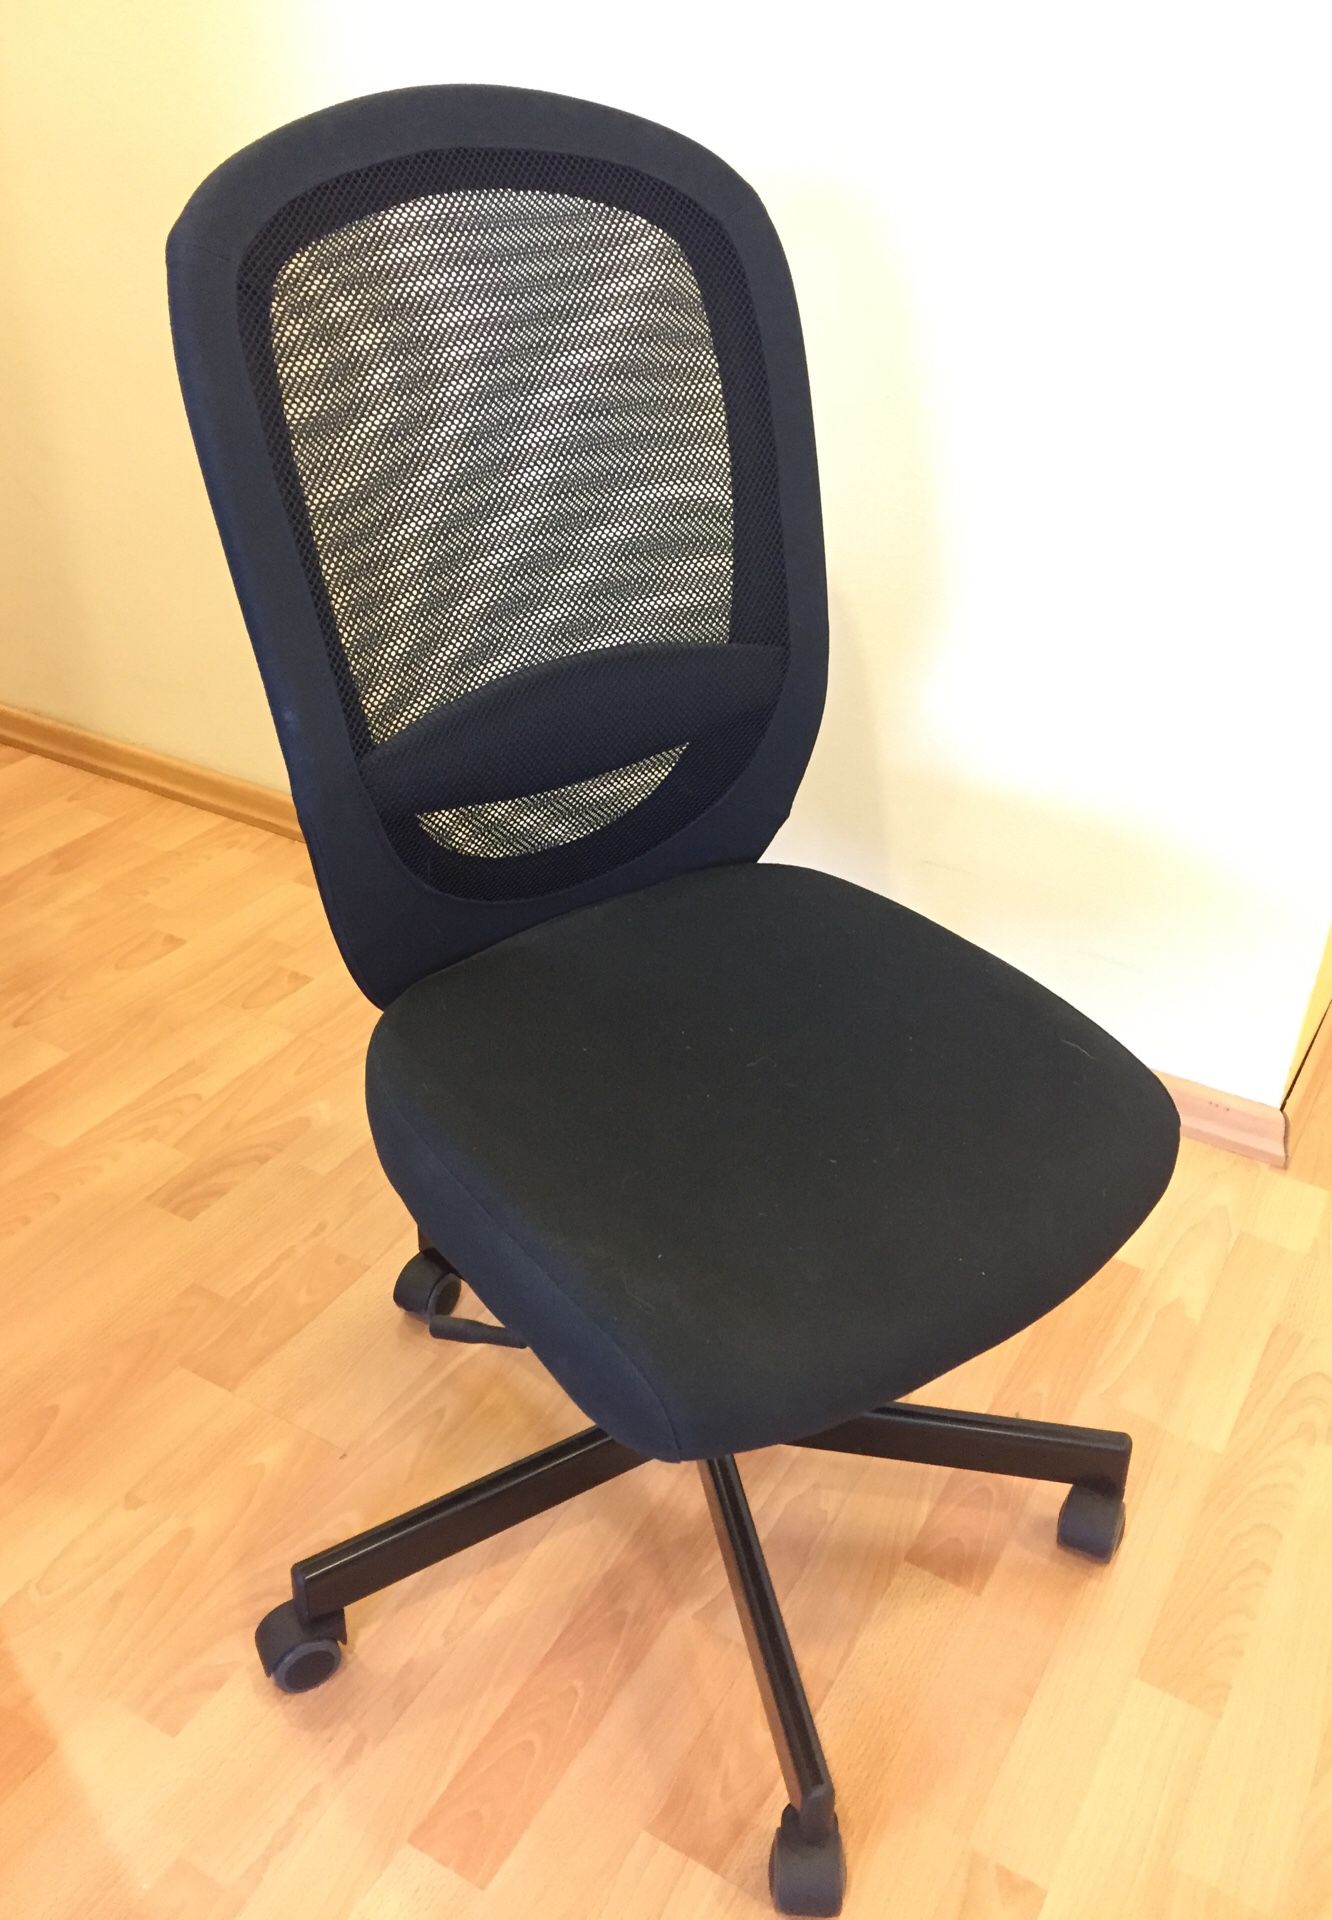 Black Office chair (like new)